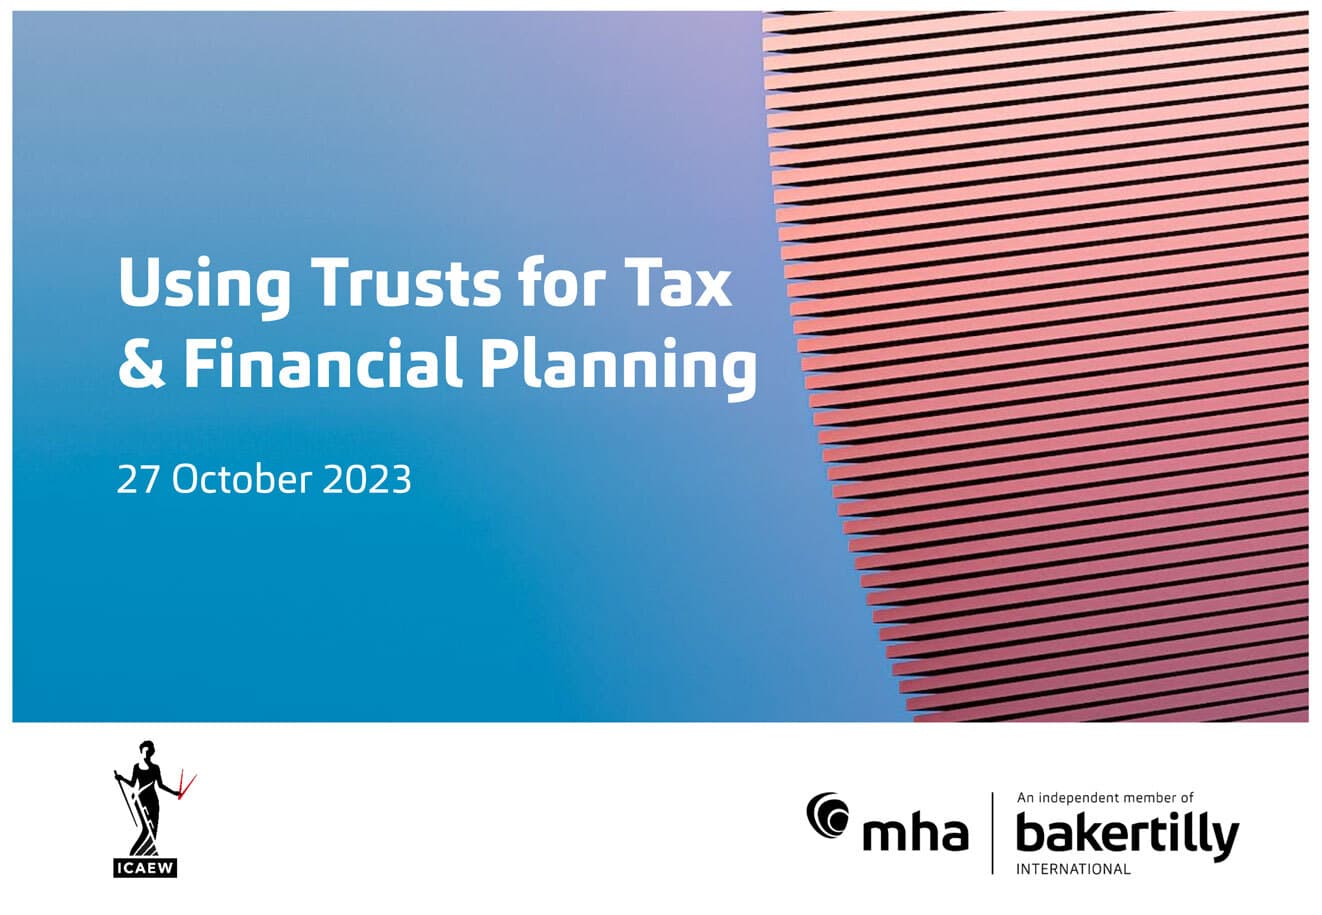 Using Trusts for Tax Financial Planning